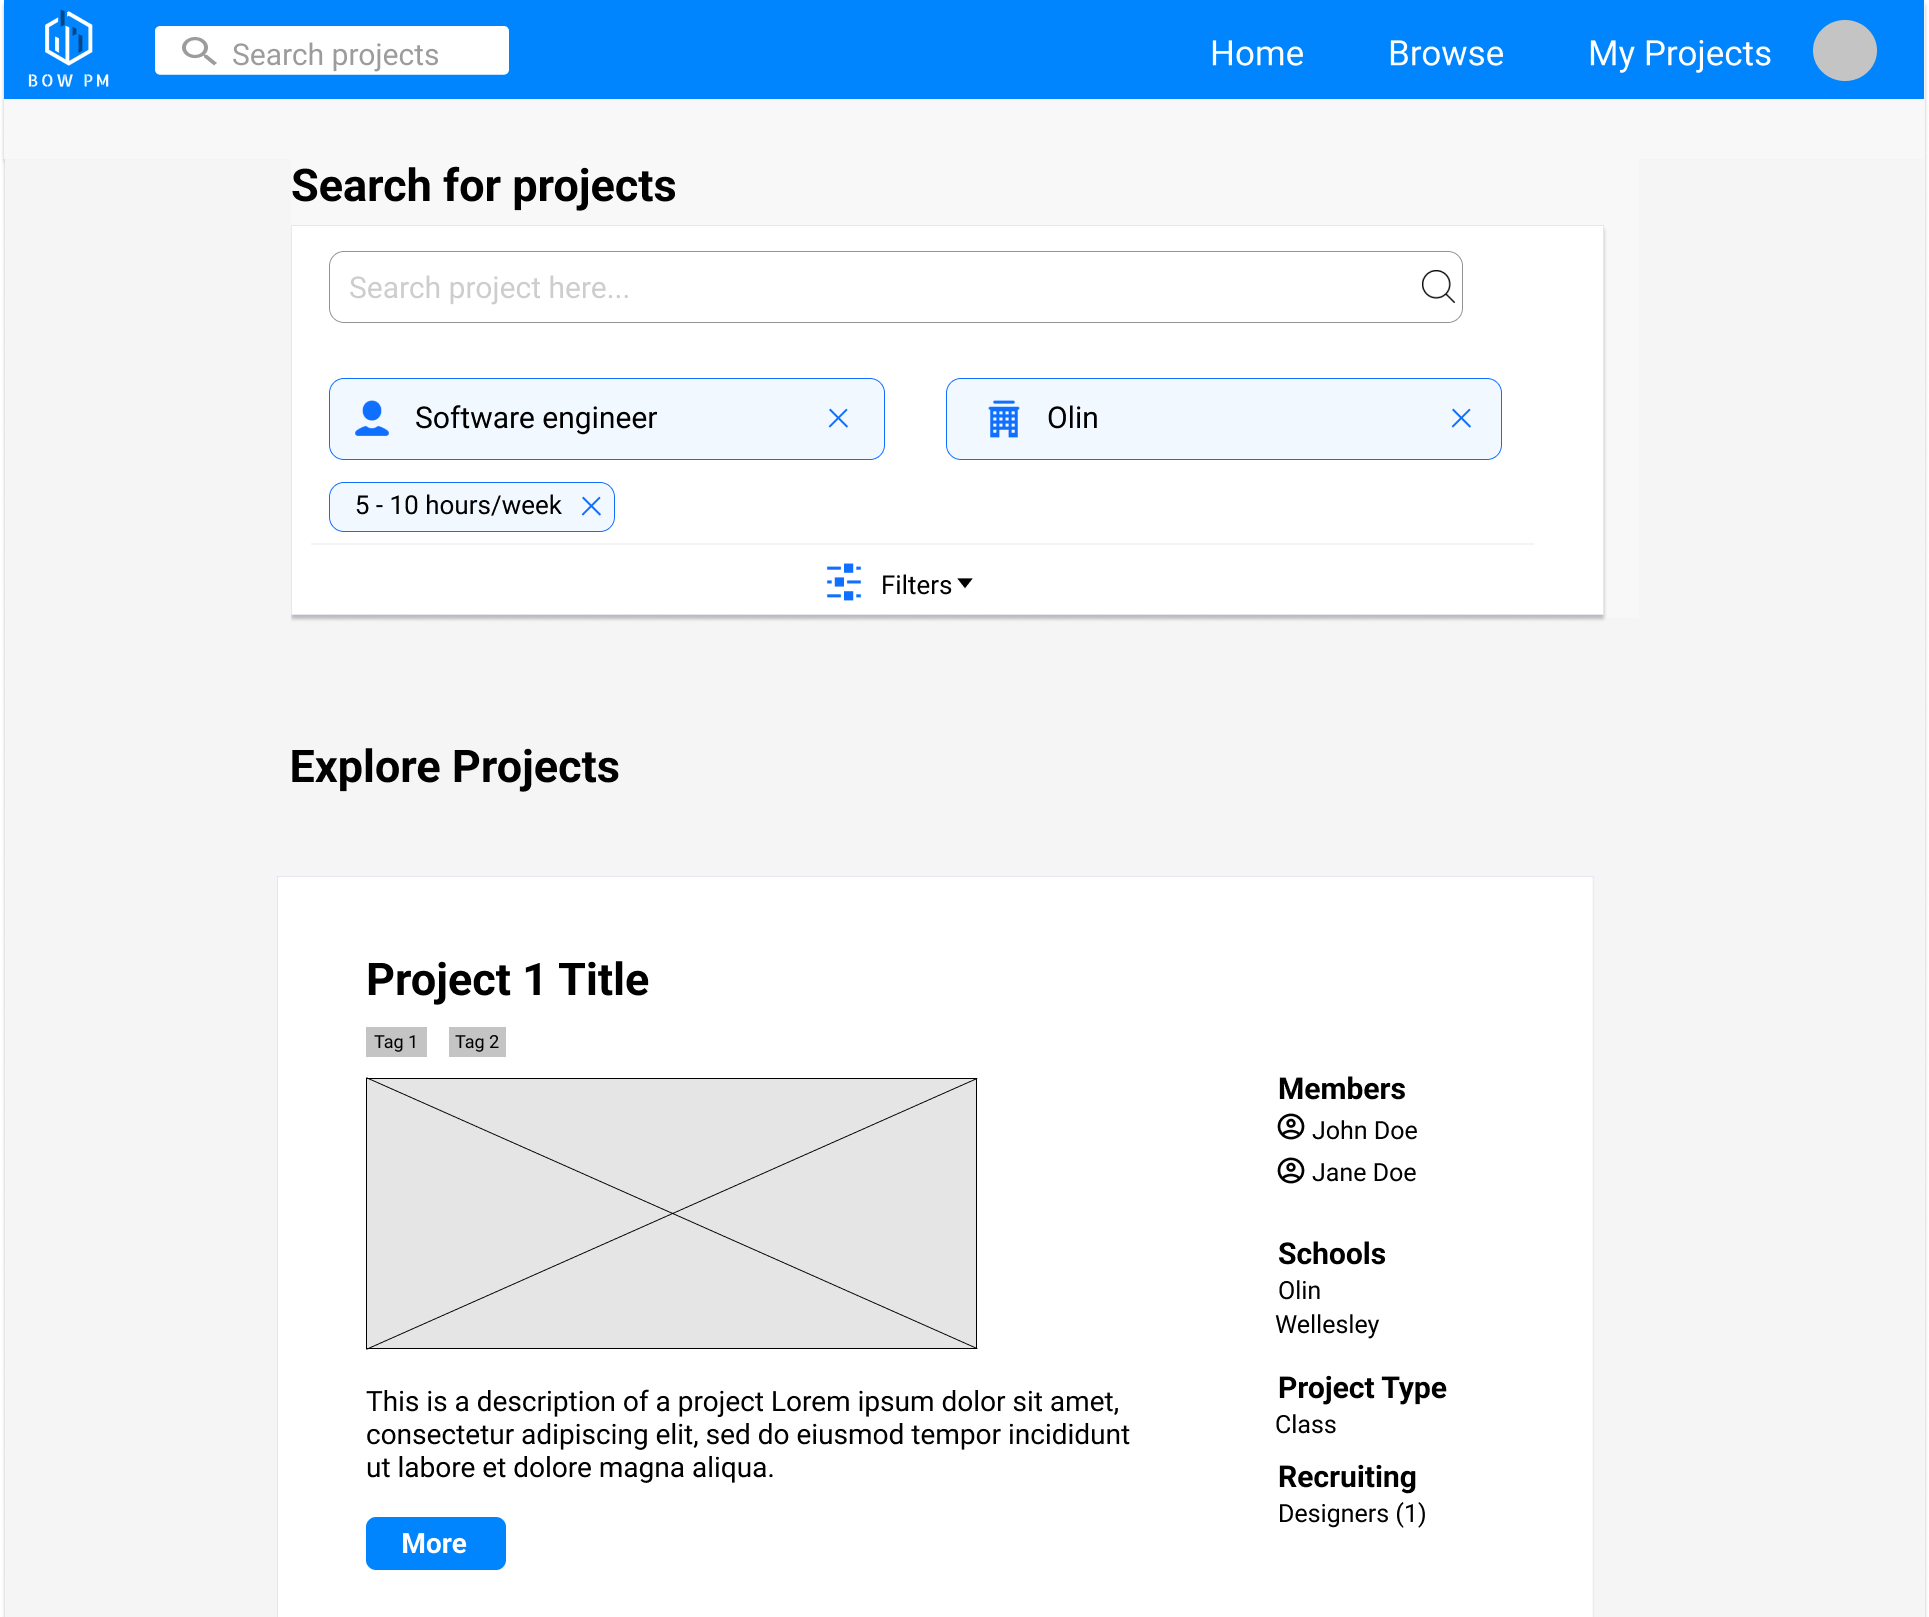 Screen grab of the search projects page Figma mockup